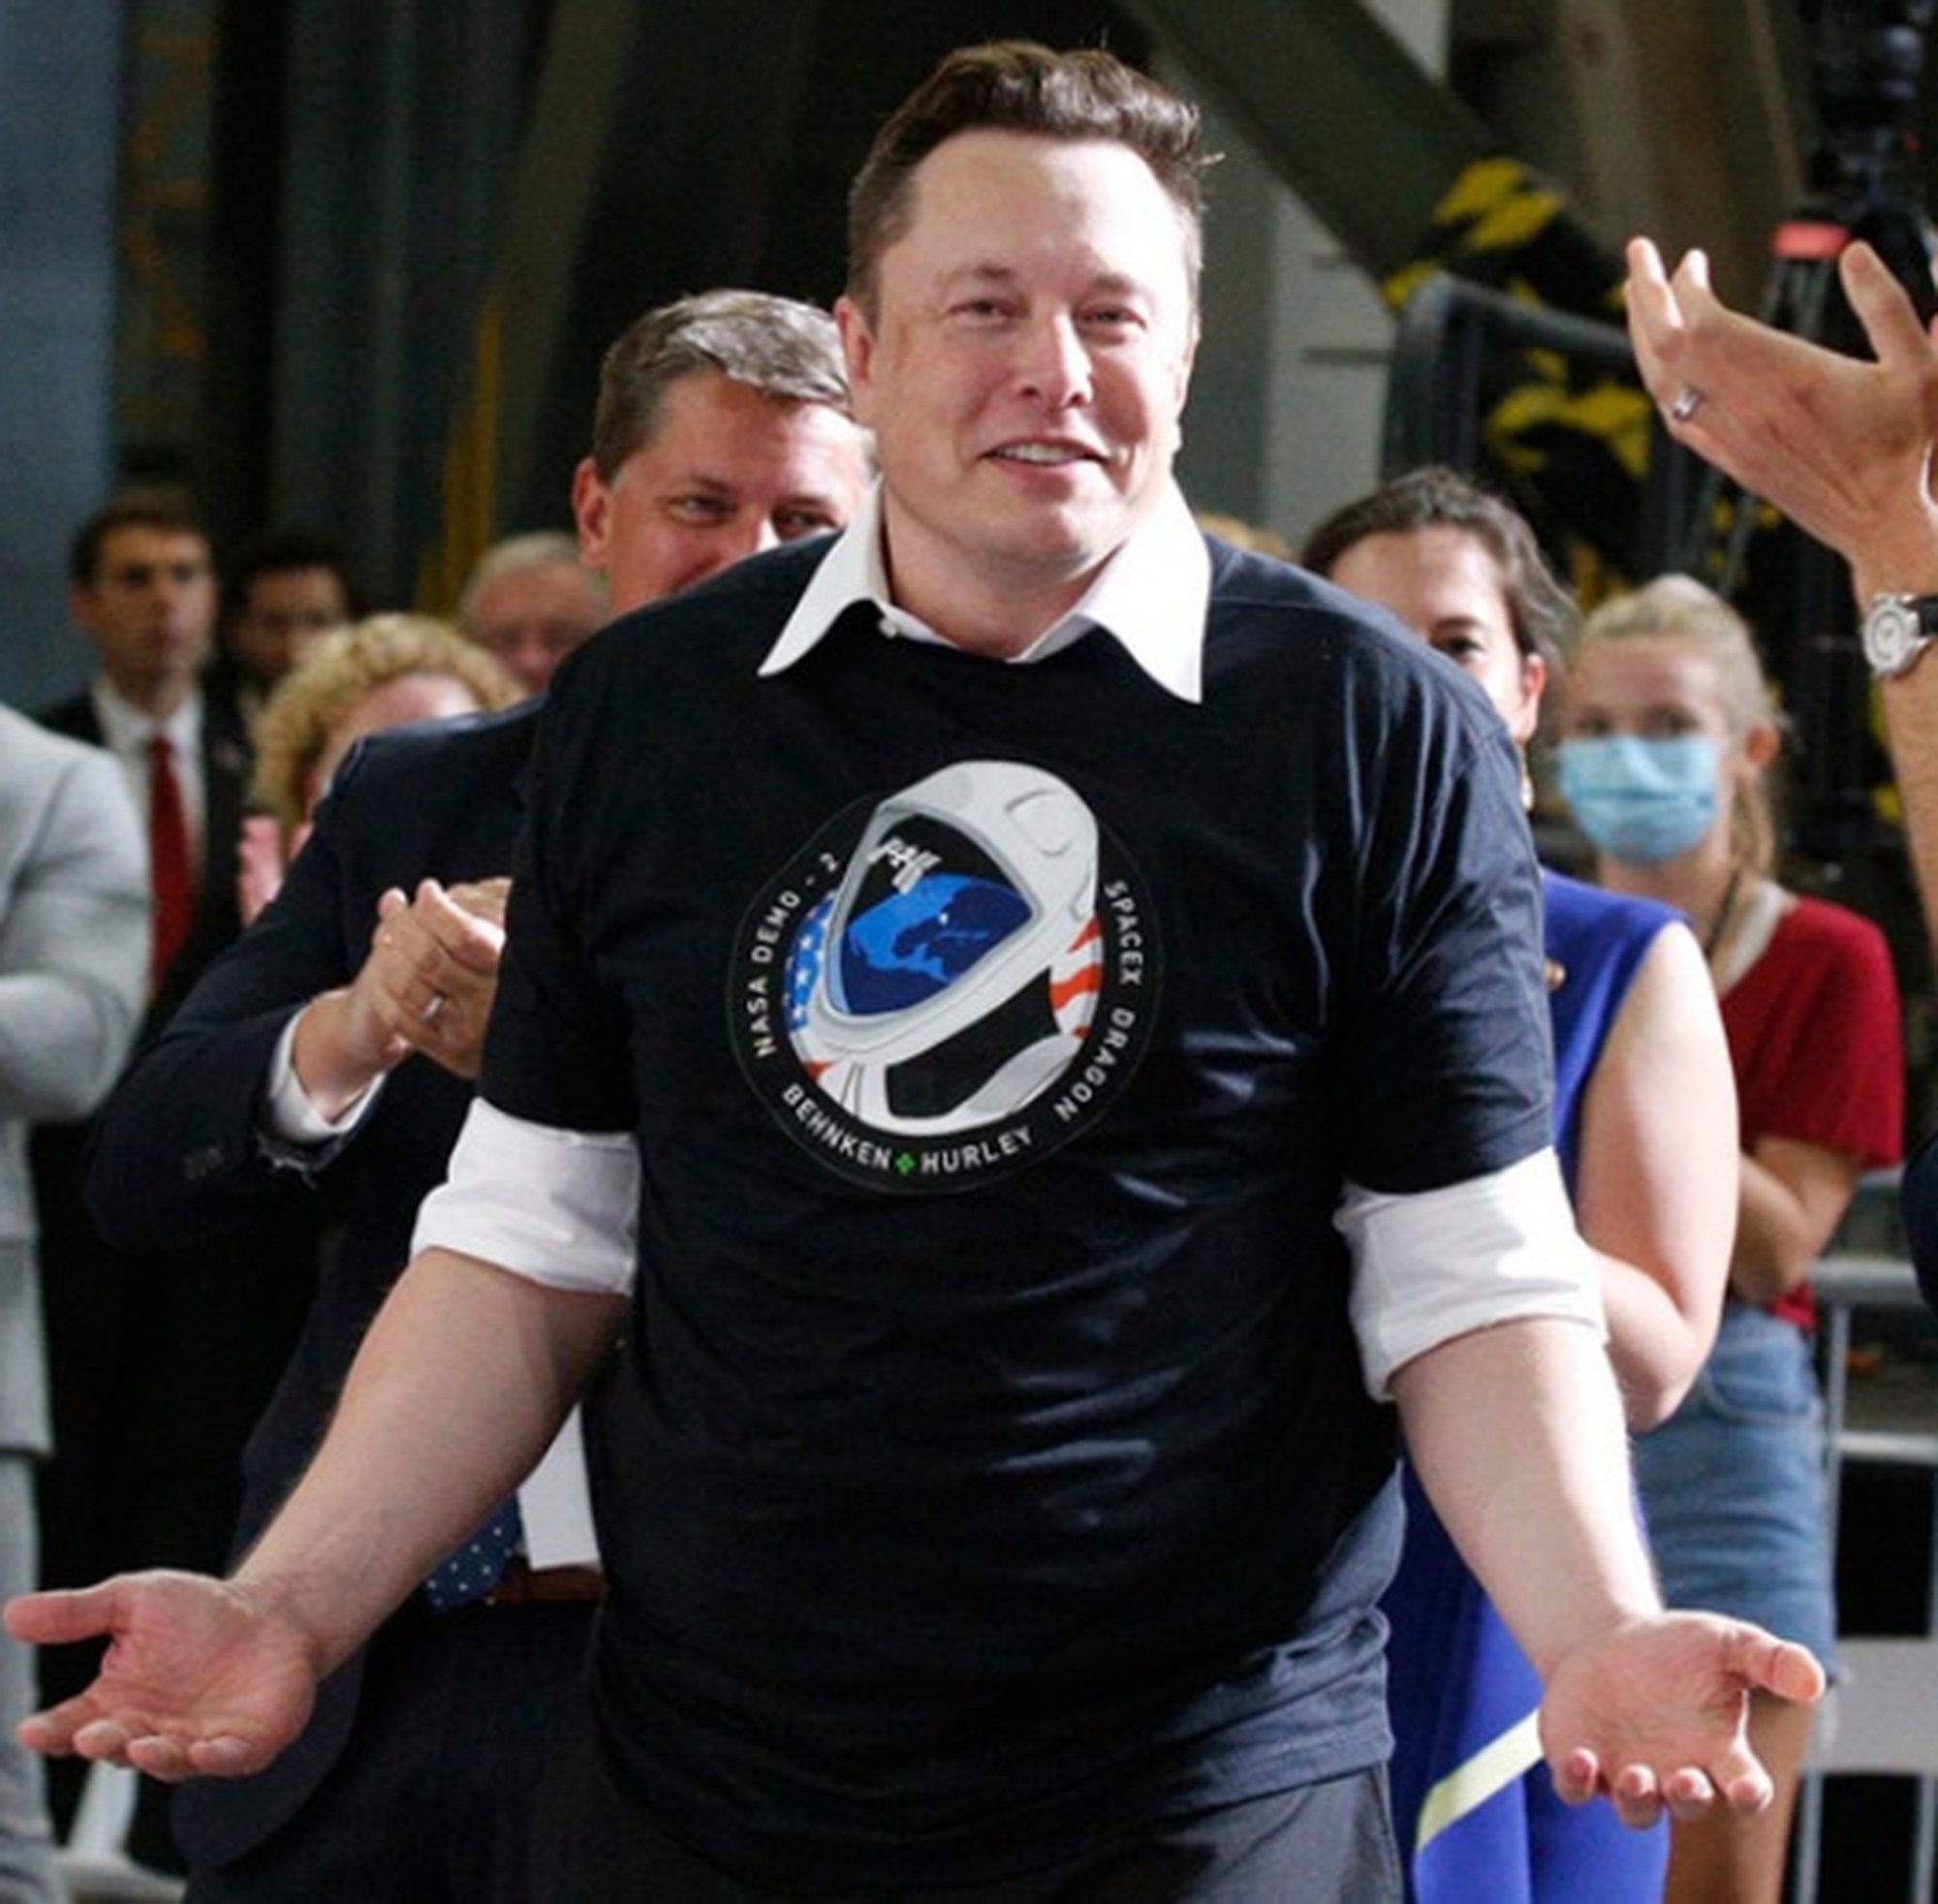 Have a picnic Lee Smile Spacex And Tesla Founder Elon Musk At The Kennedy Space Center Nasa Unisex T -Shirt - Beeteeshop